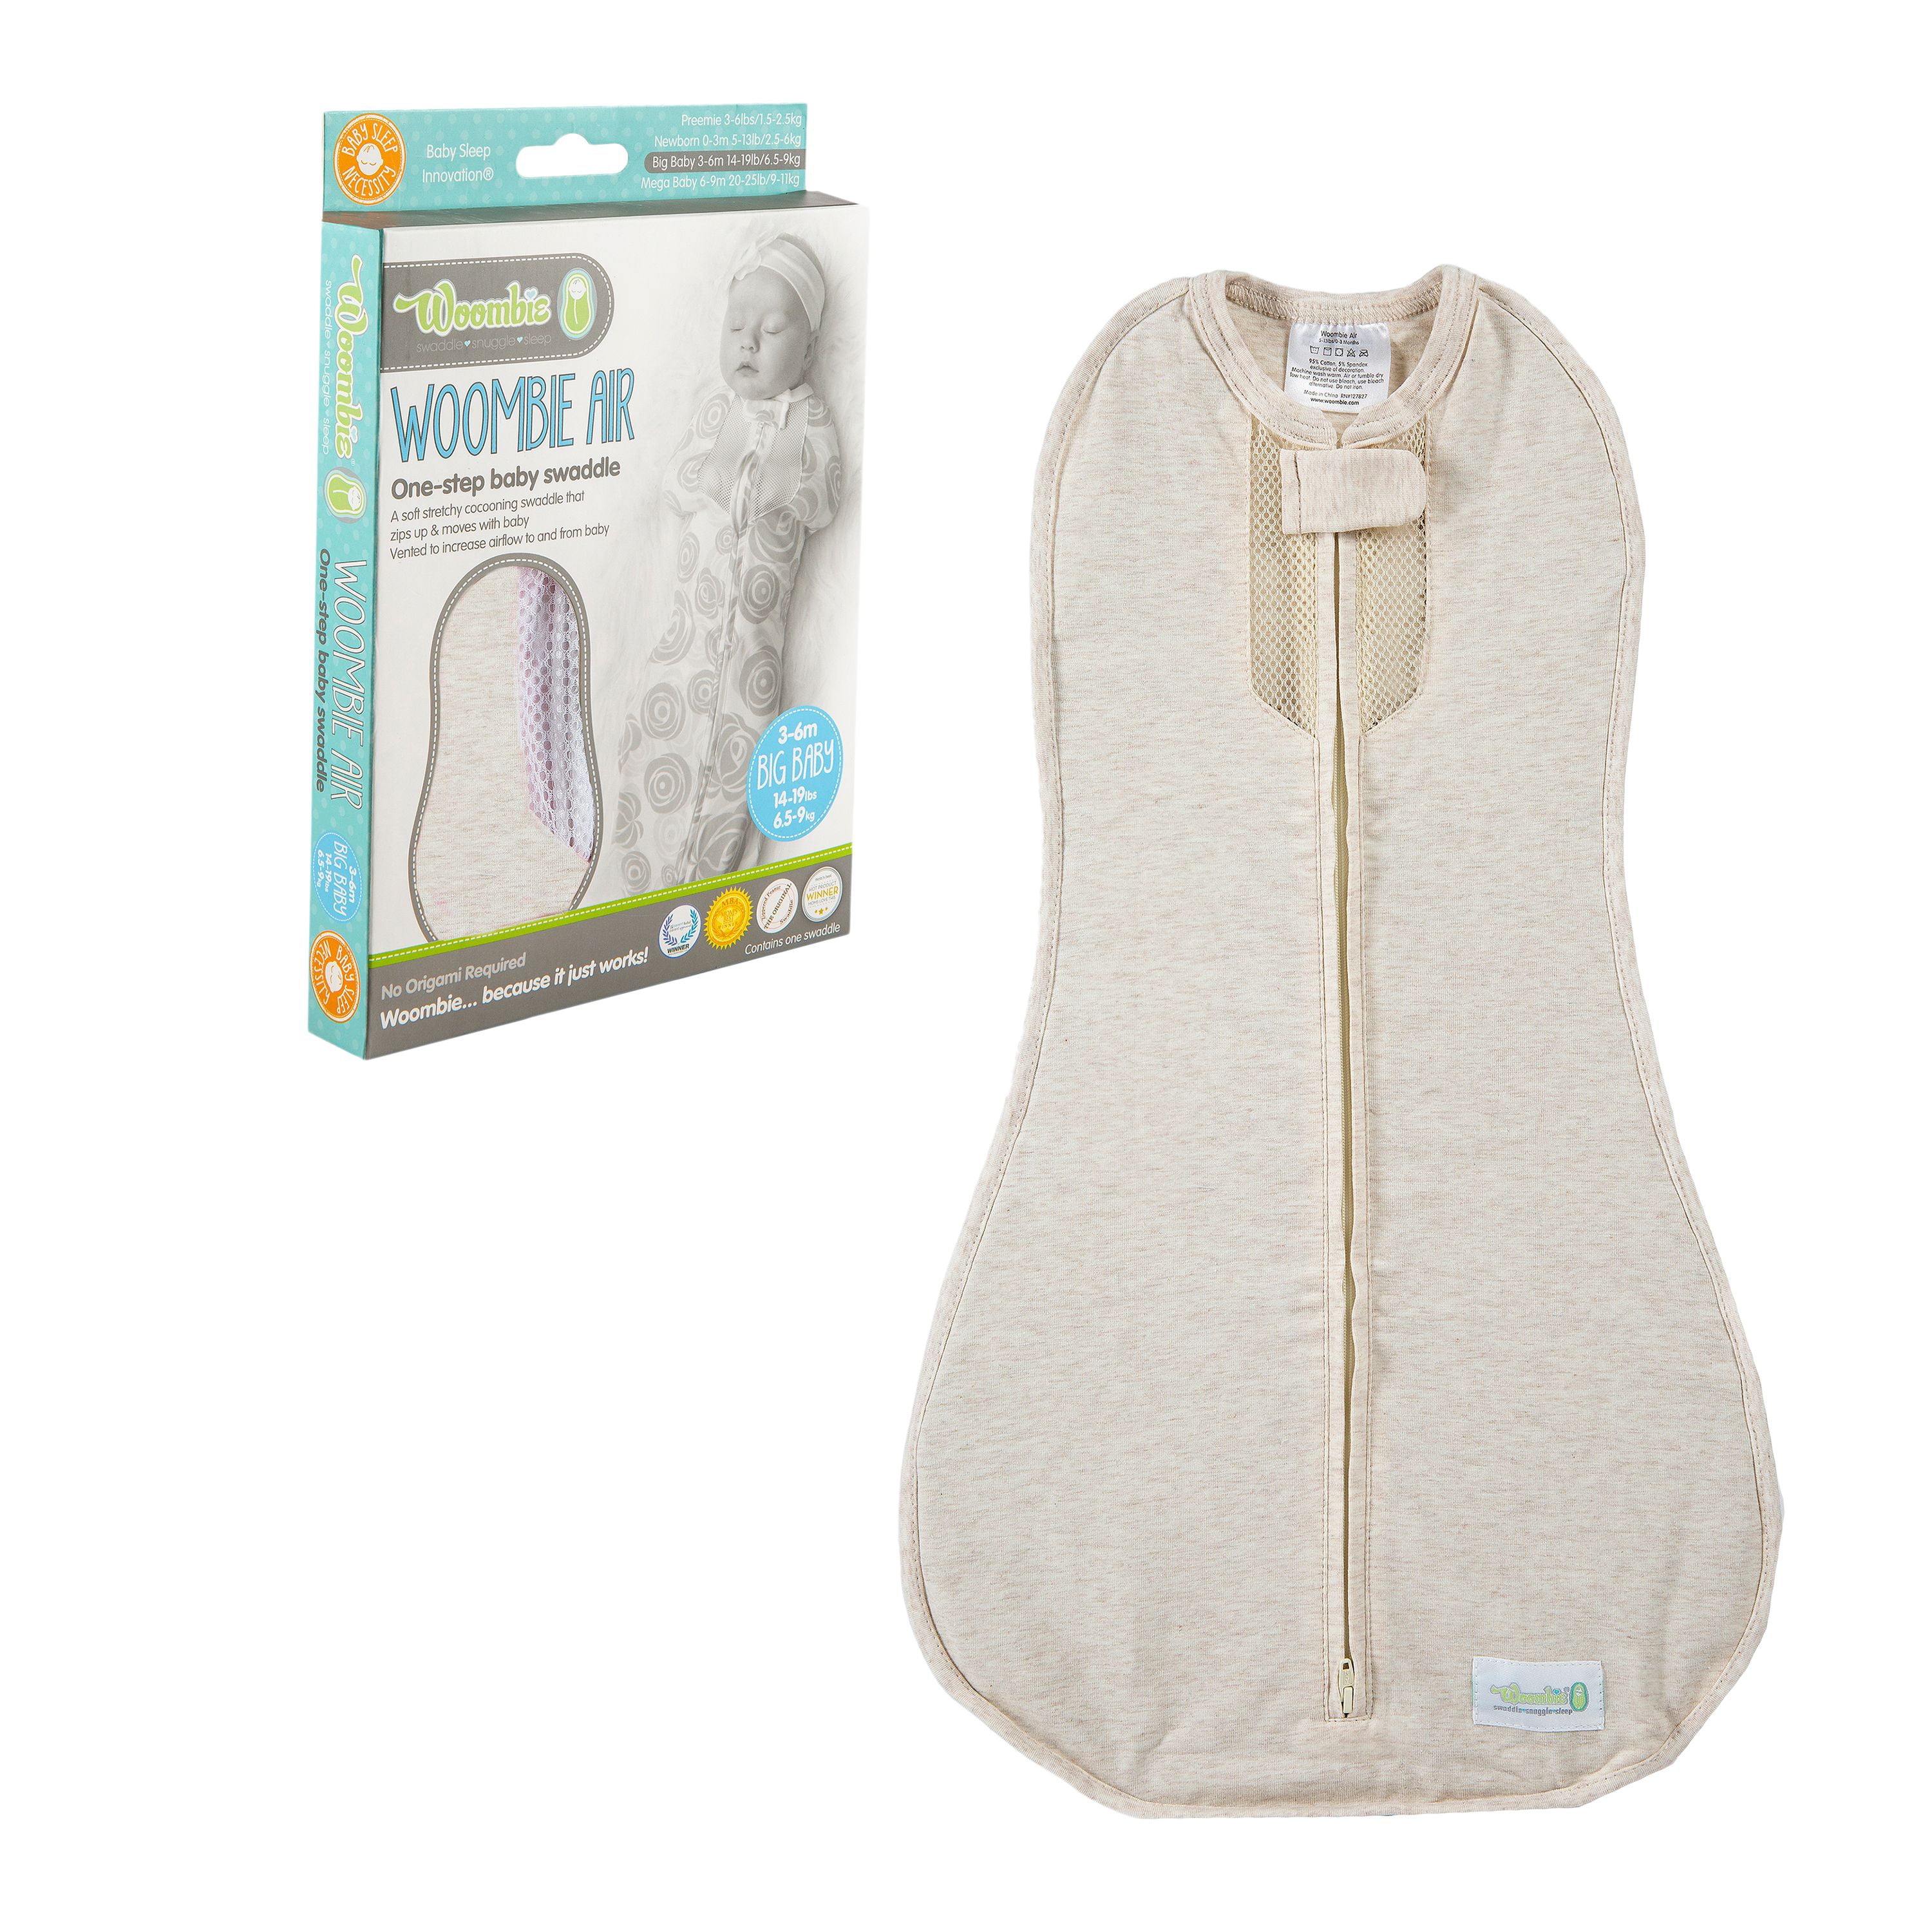 New Baby Swaddler Swaddle 14-19 Lbs. 